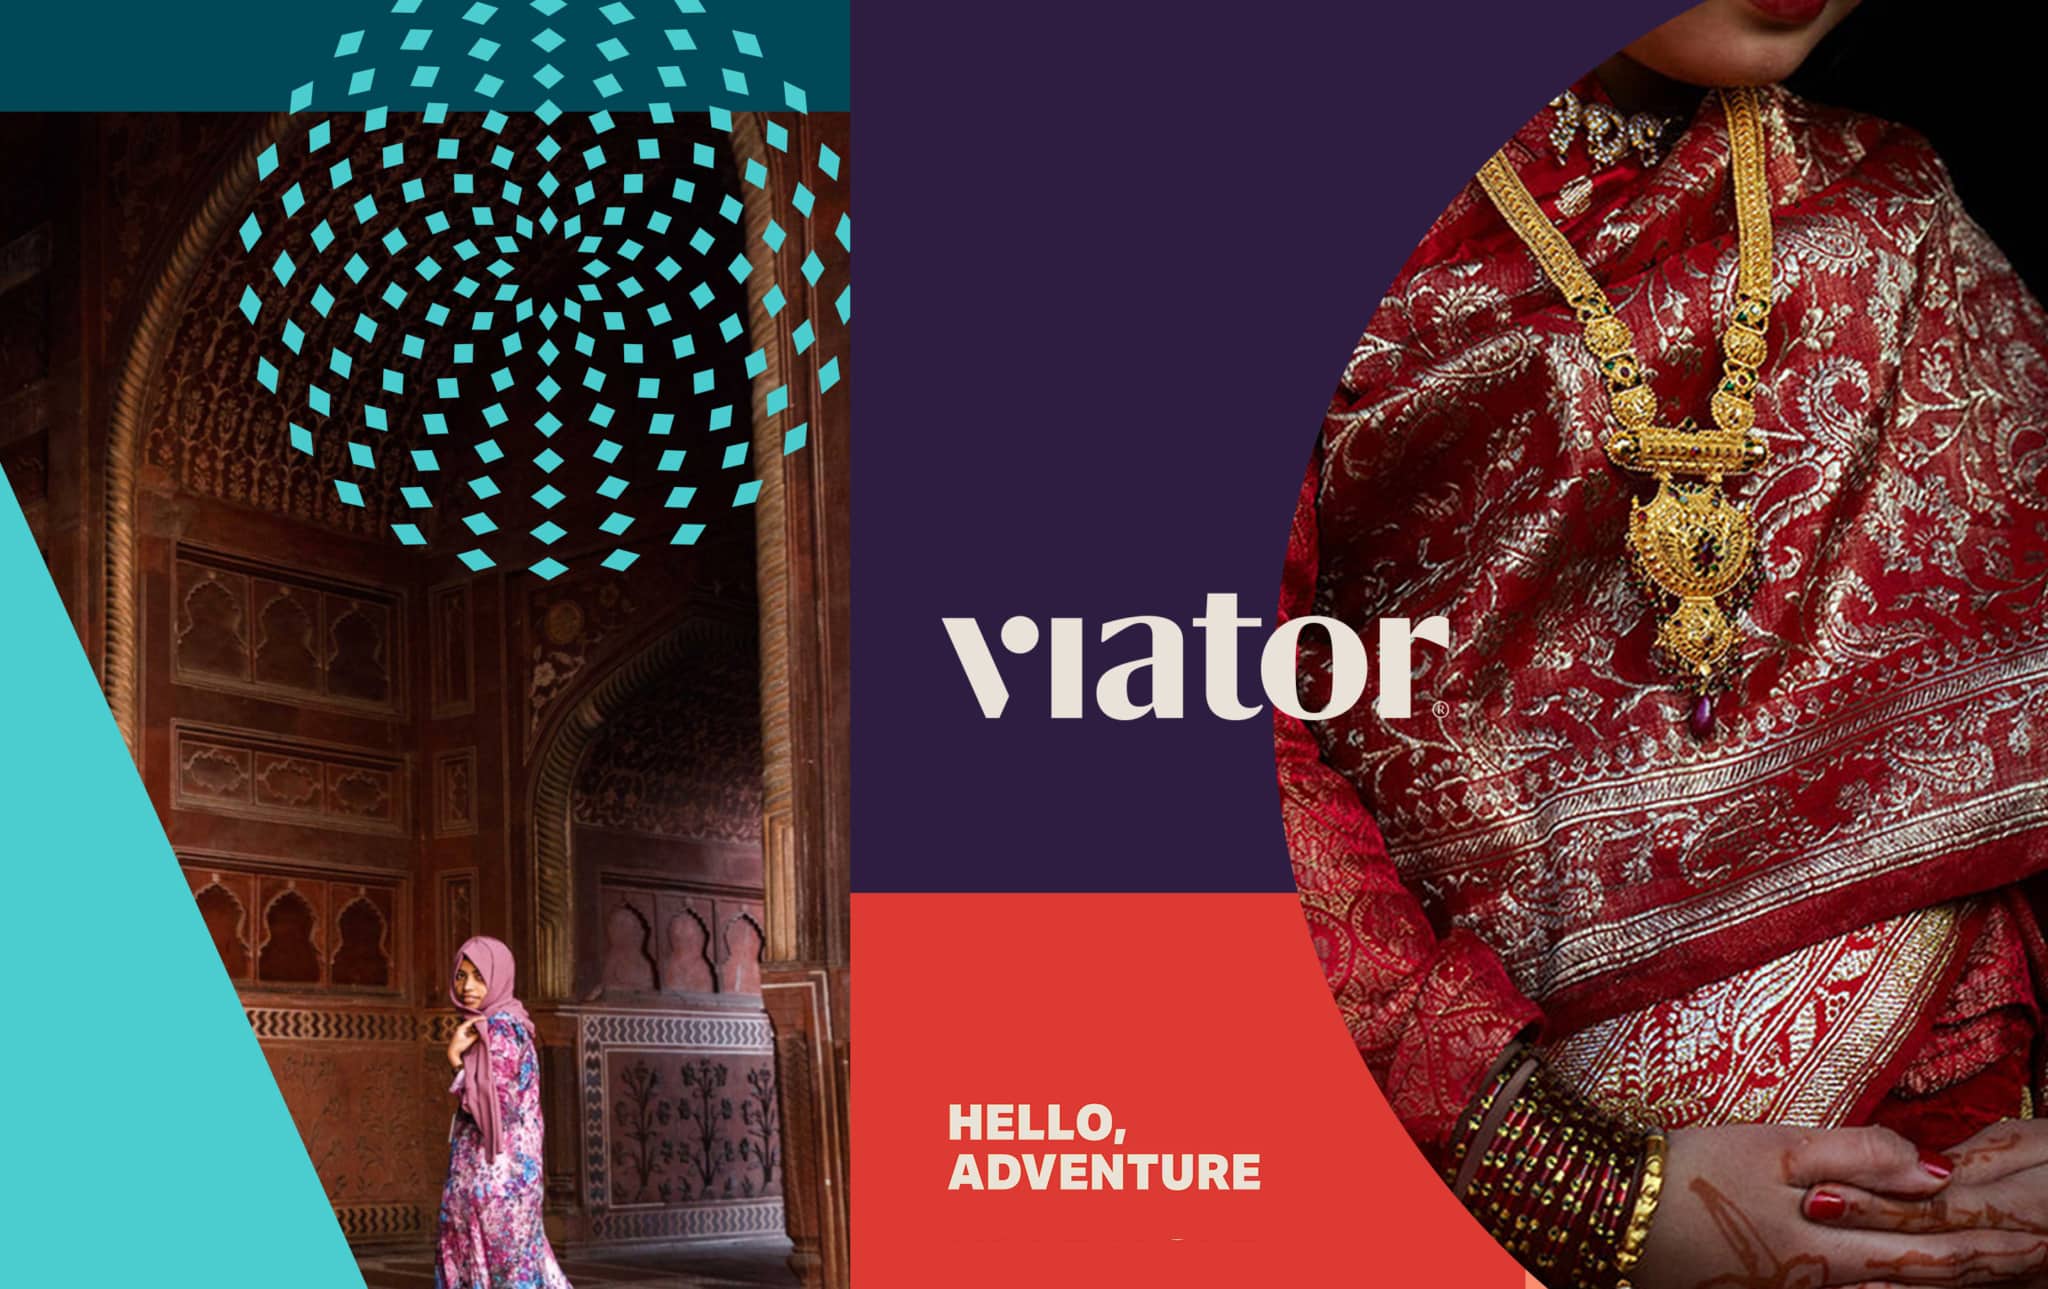 Cover photo for a story about the Viator’s brand redesign. Included in the image are a barefoot 20-something female-presenting person in a pink tunic and mauve hijab. She’s walking in an empty hall with Middle Eastern architectural details. Also included is an image of a person in a red sari, ornate golden necklace and stack of wrist bangles. The image includes the brand’s new tagline “Hello, adventure